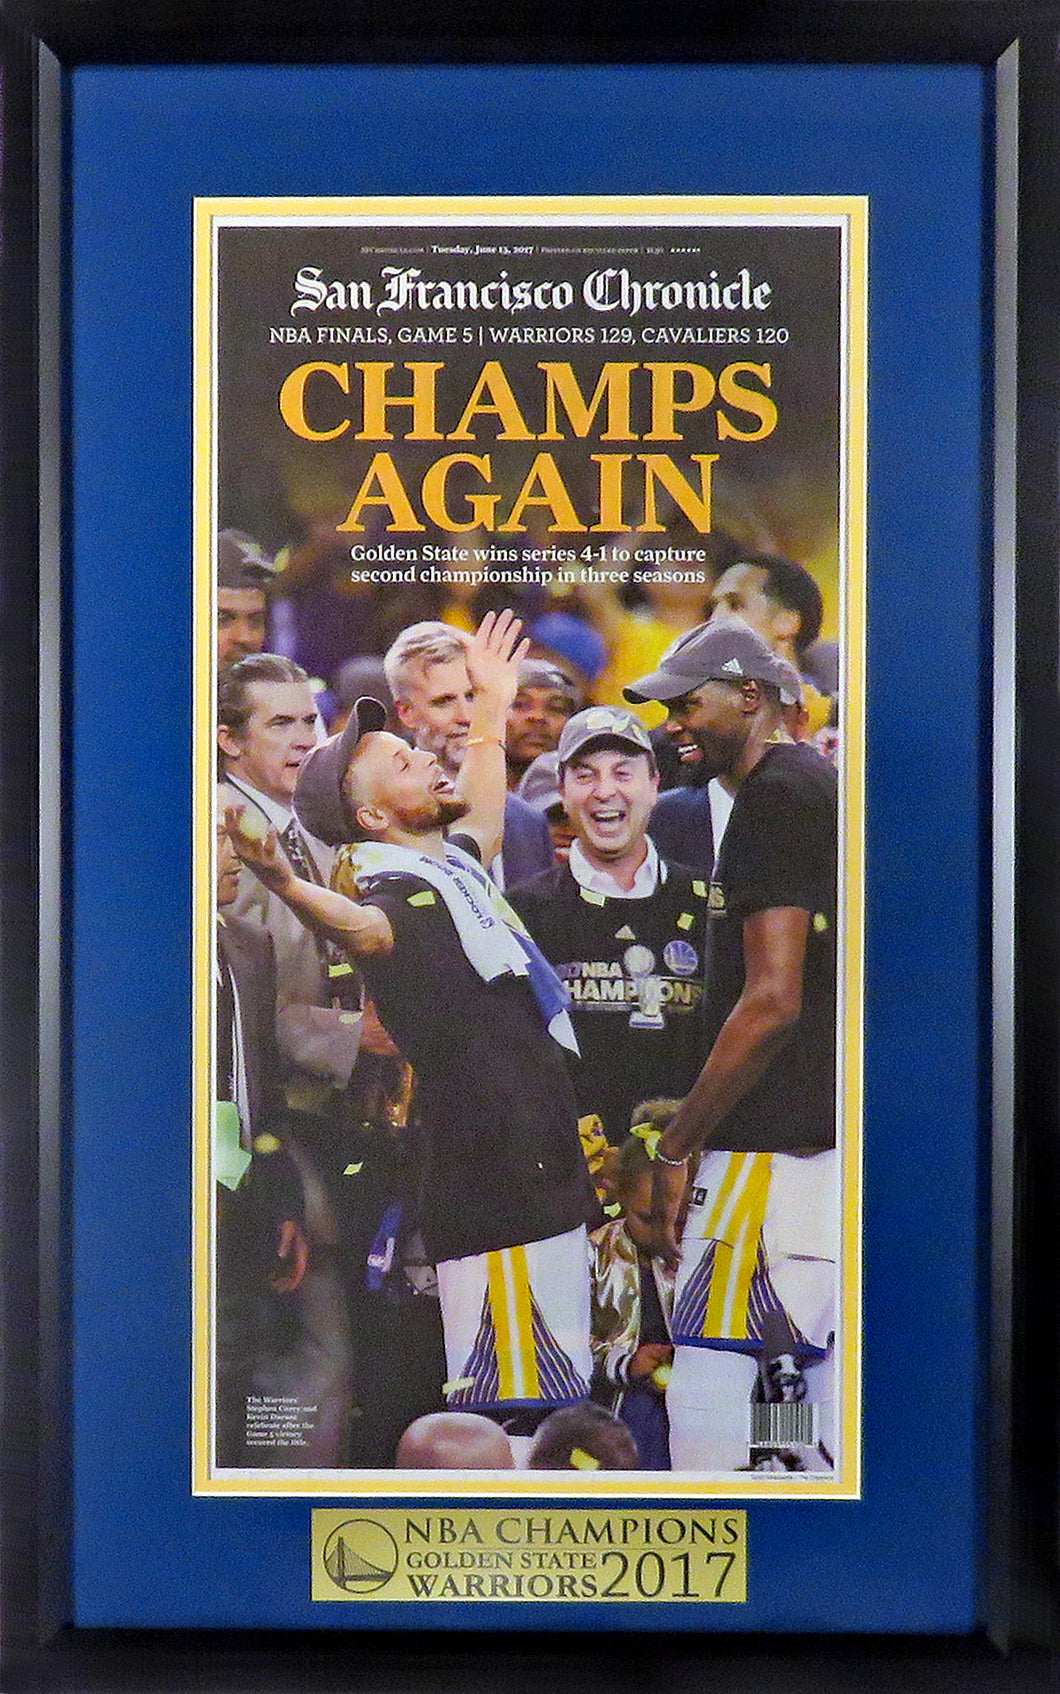 Golden State Warriors 2017 NBA Championship Newspaper Framed Display (Ft. Stephen Curry & Kevin Durant)